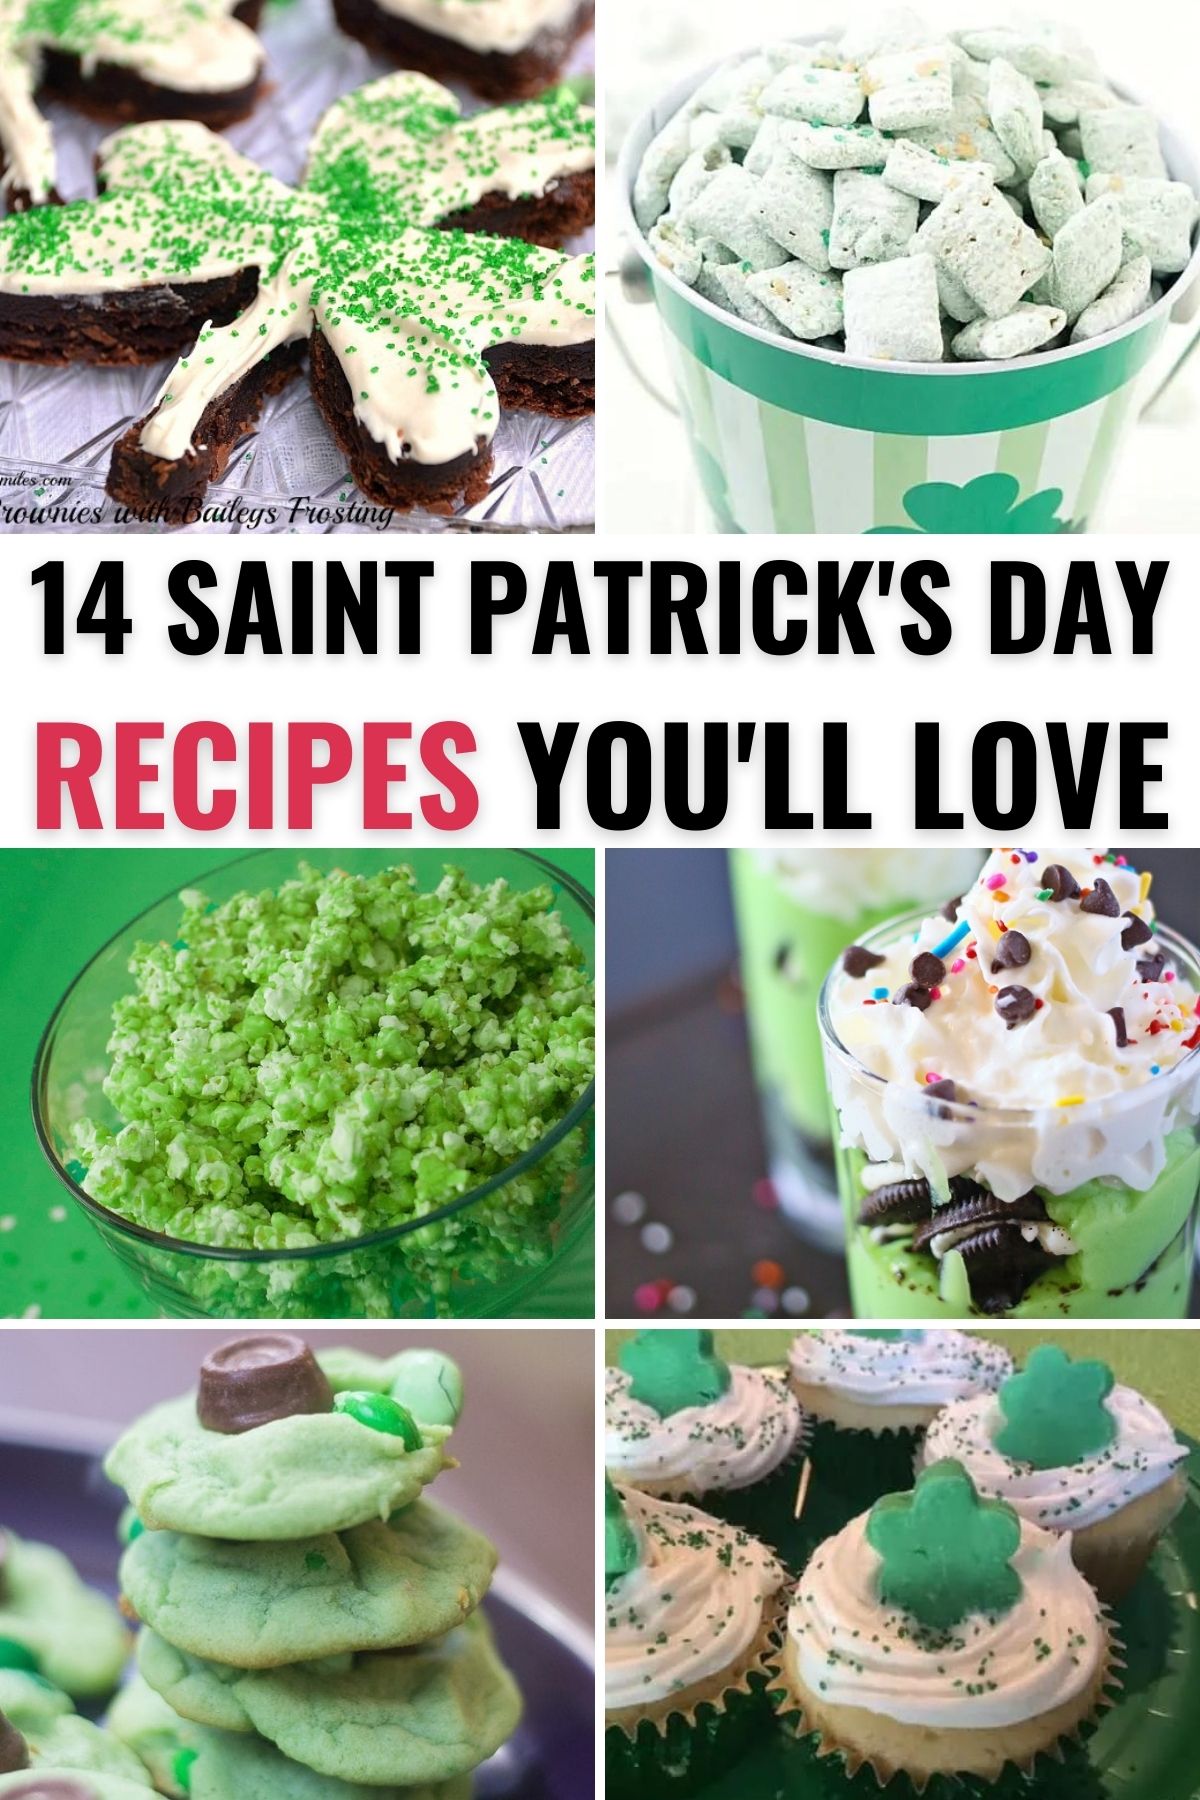 A collection of Saint Patrick's Day dessert recipes.